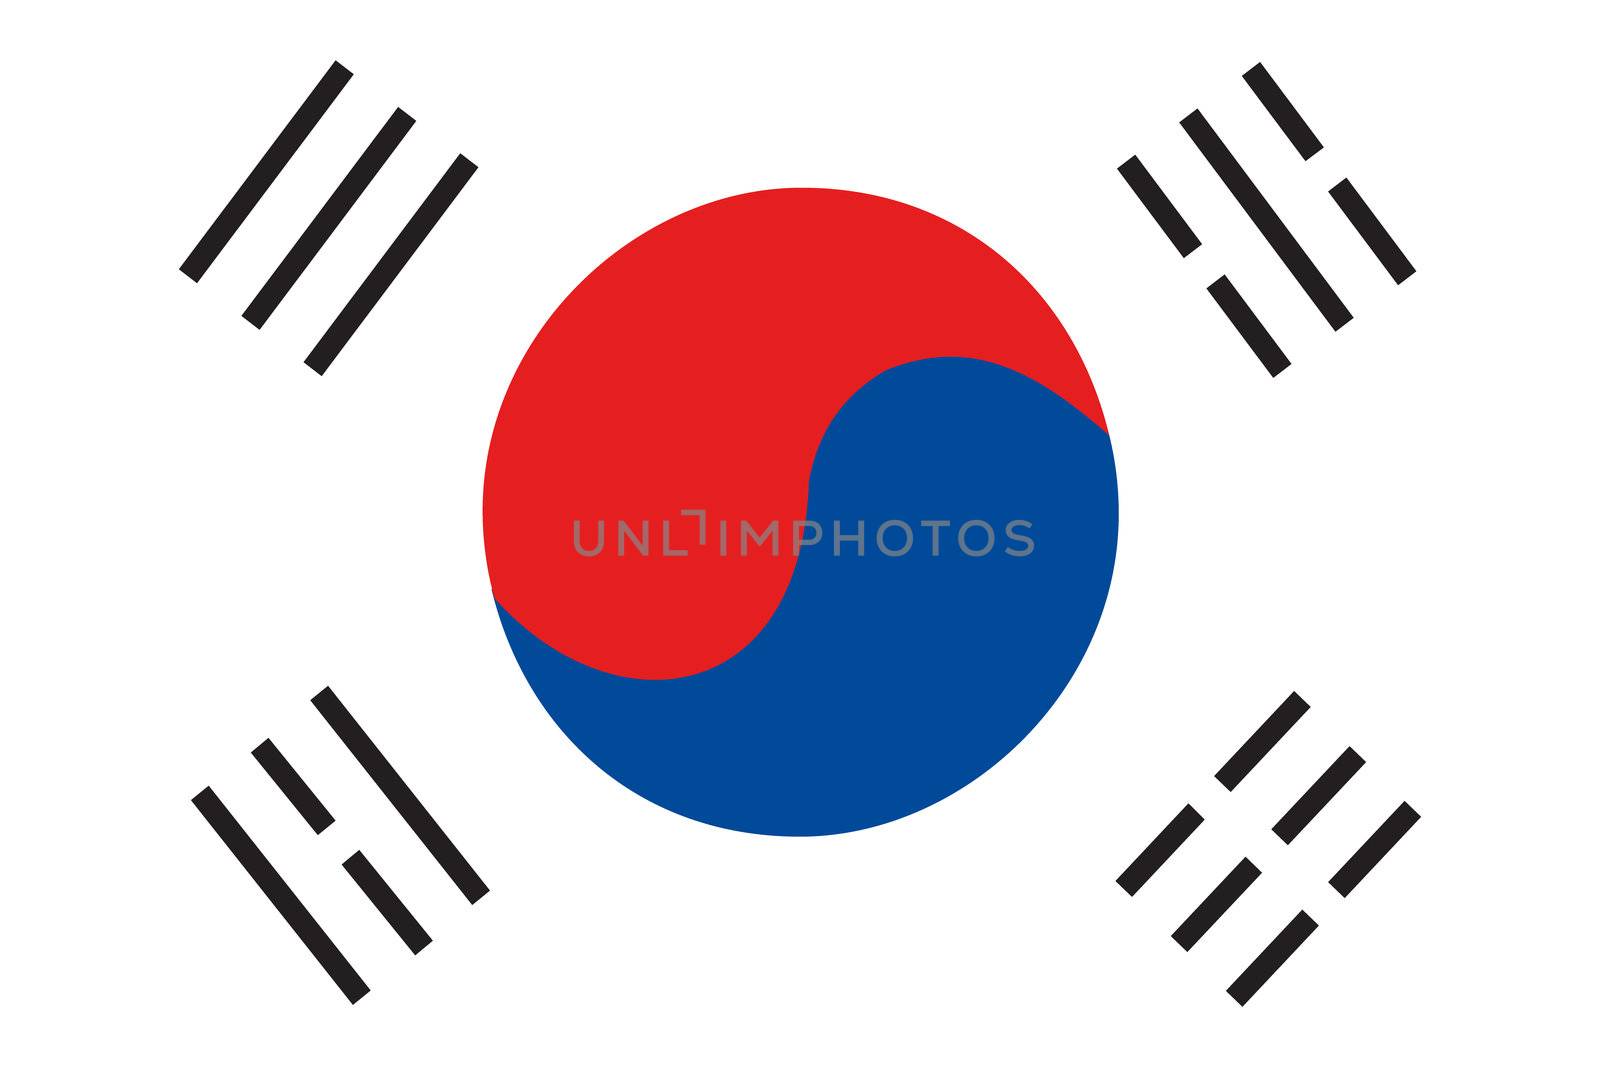 An illustration of the flag of South Korea